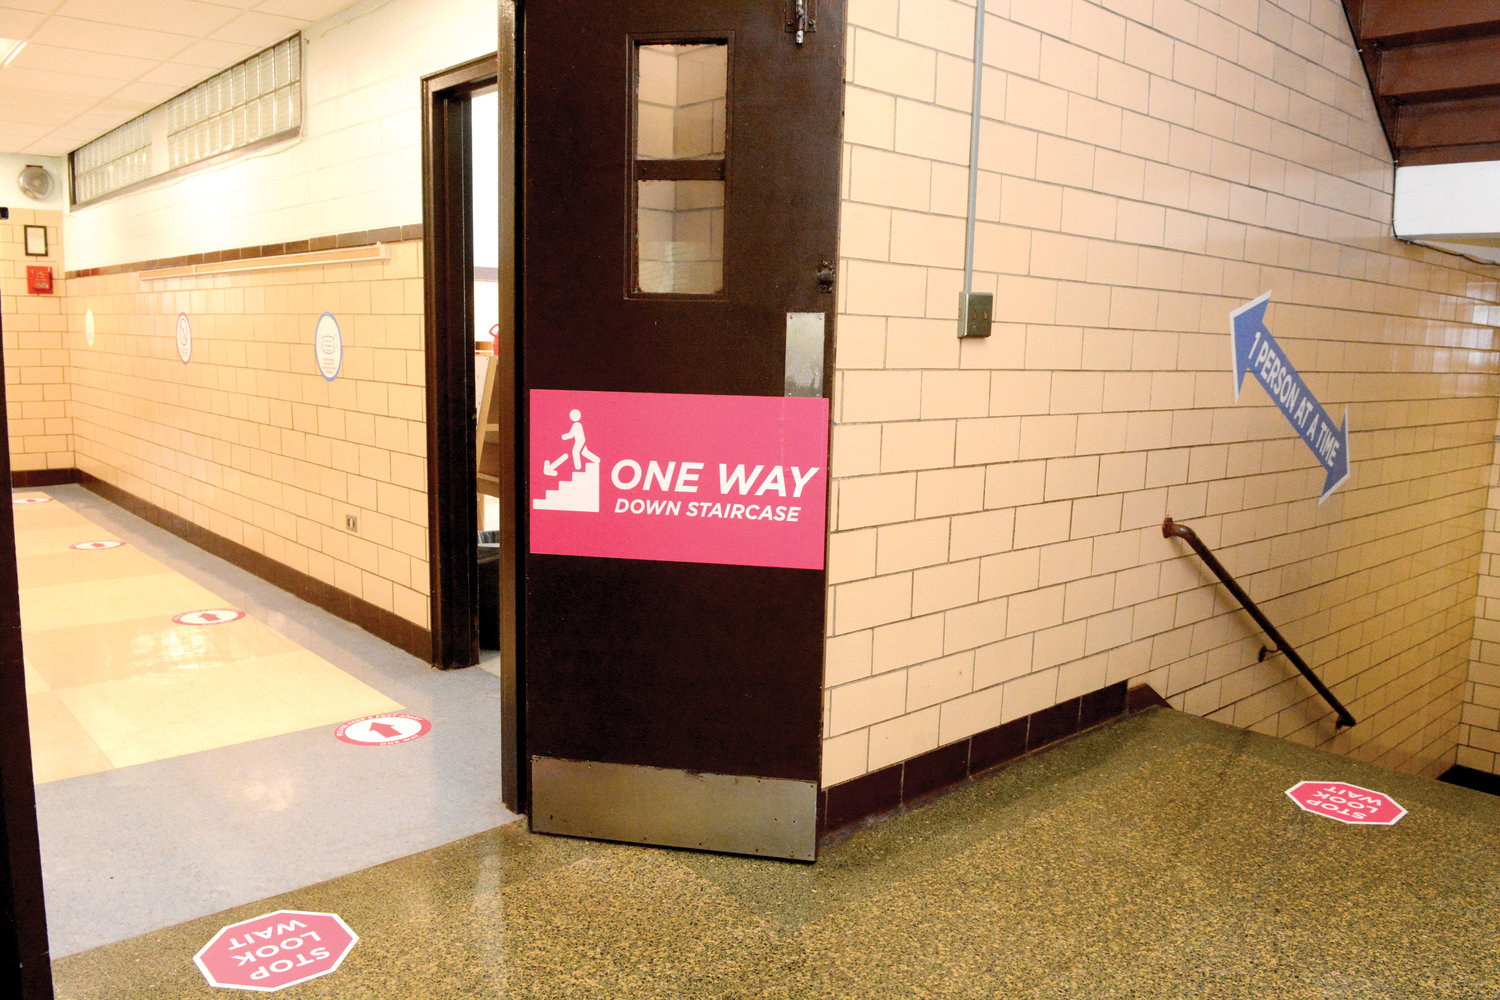 A user-friendly grid of arrows and social distance stickers will help elementary school students navigate the new normal at Immaculate Conception School on East Gun Hill Road, the Bronx.